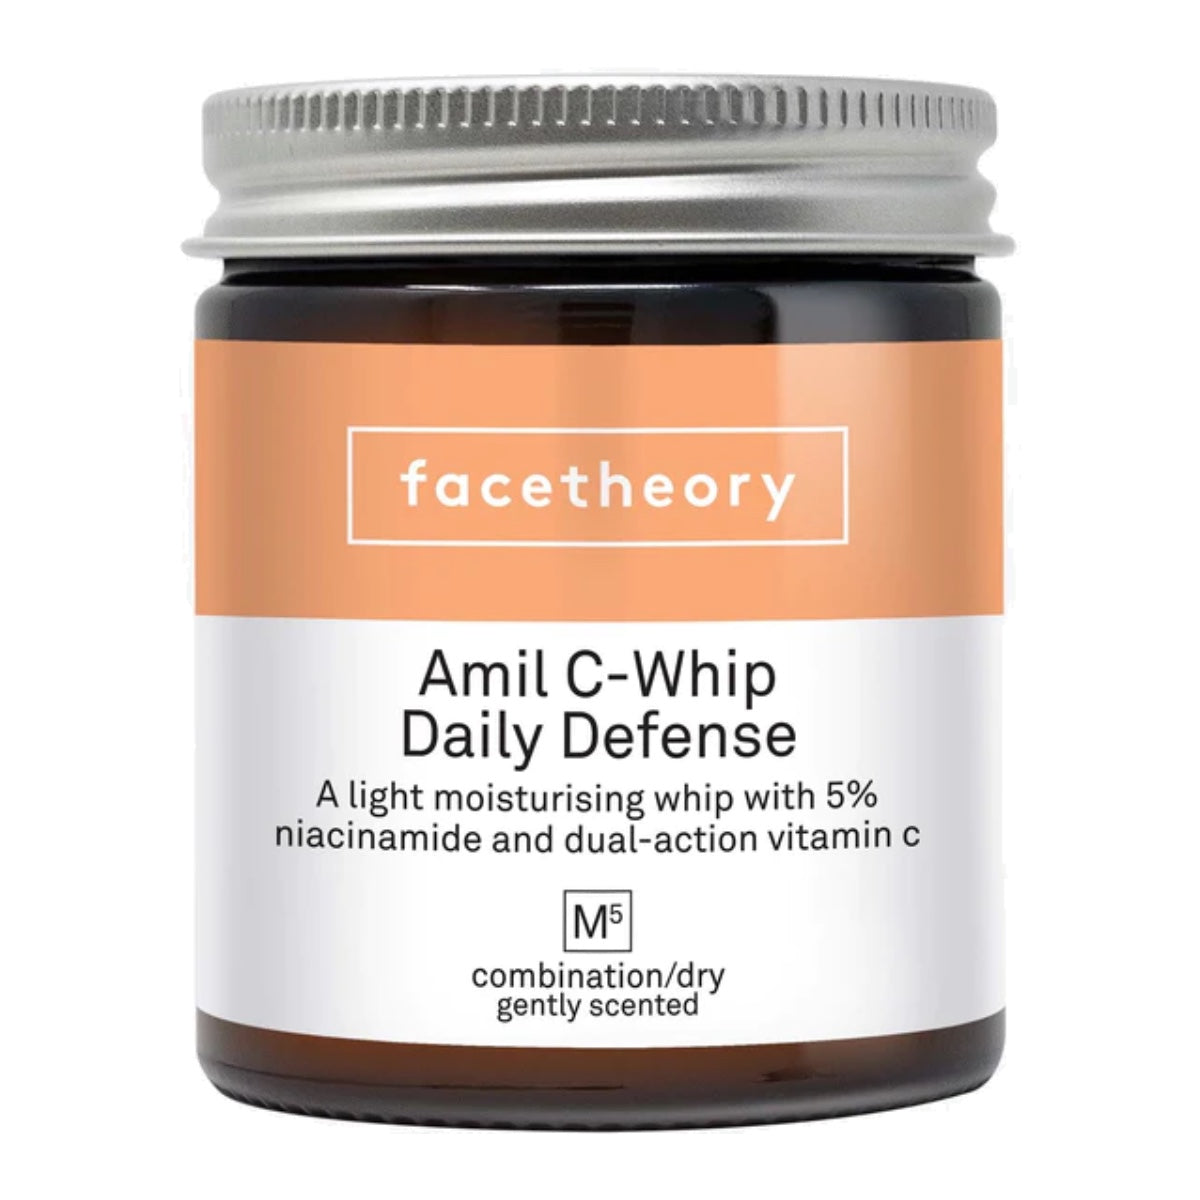 Facetheory Amil C-Whip Daily Defense 50 ml